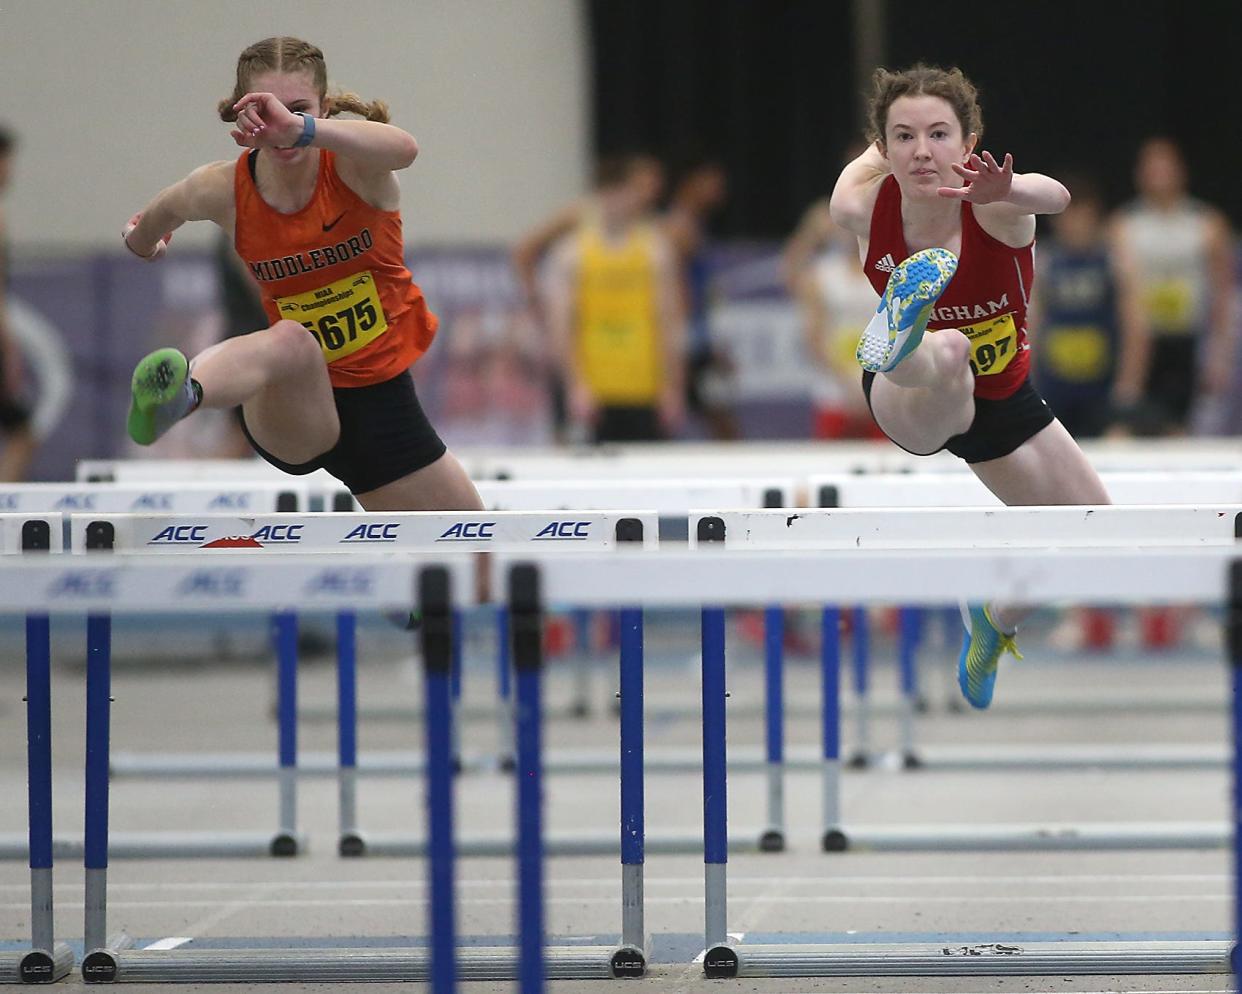 Hingham’s Emma Mills and Middleborough’s Isabel Wheeler leap over the hurdle during the preliminary round of the 55 meter hurdles at the MIAA Meet of Champions at the Reggie Lewis Track Center in Boston on Saturday, Feb. 25, 2023.